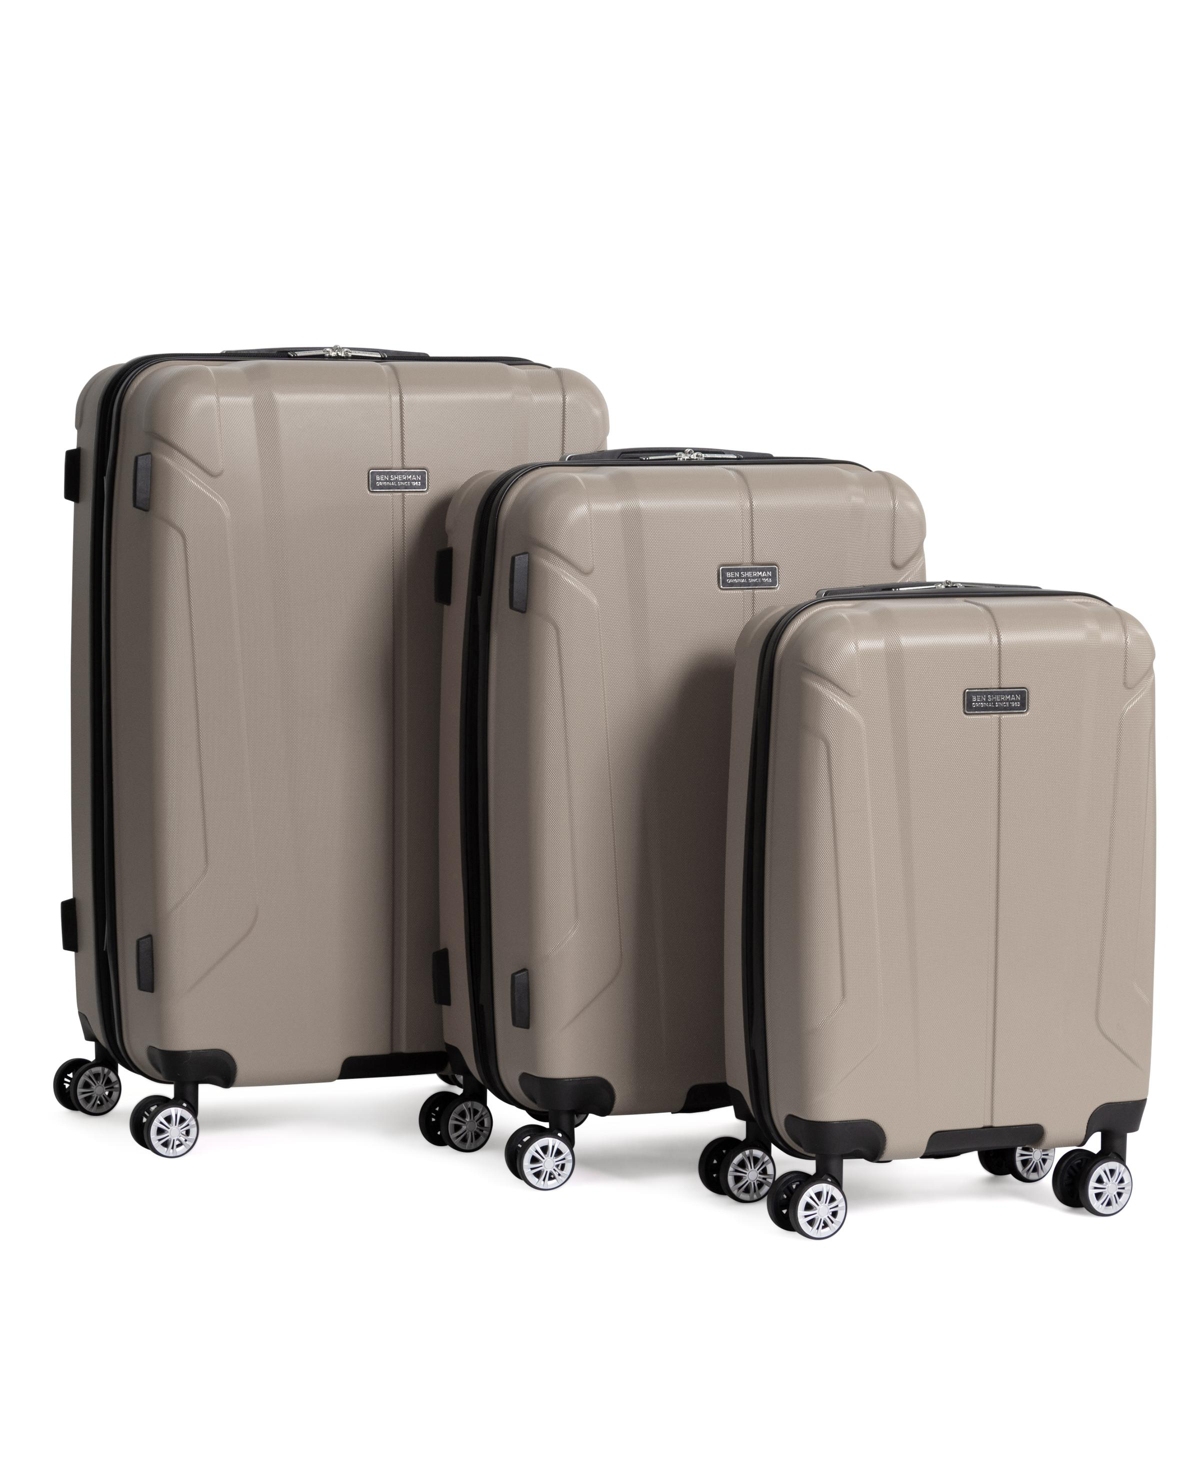 Derby 3 Piece Lightweight Hardside Expandable Spinner Luggage Set - Champagne